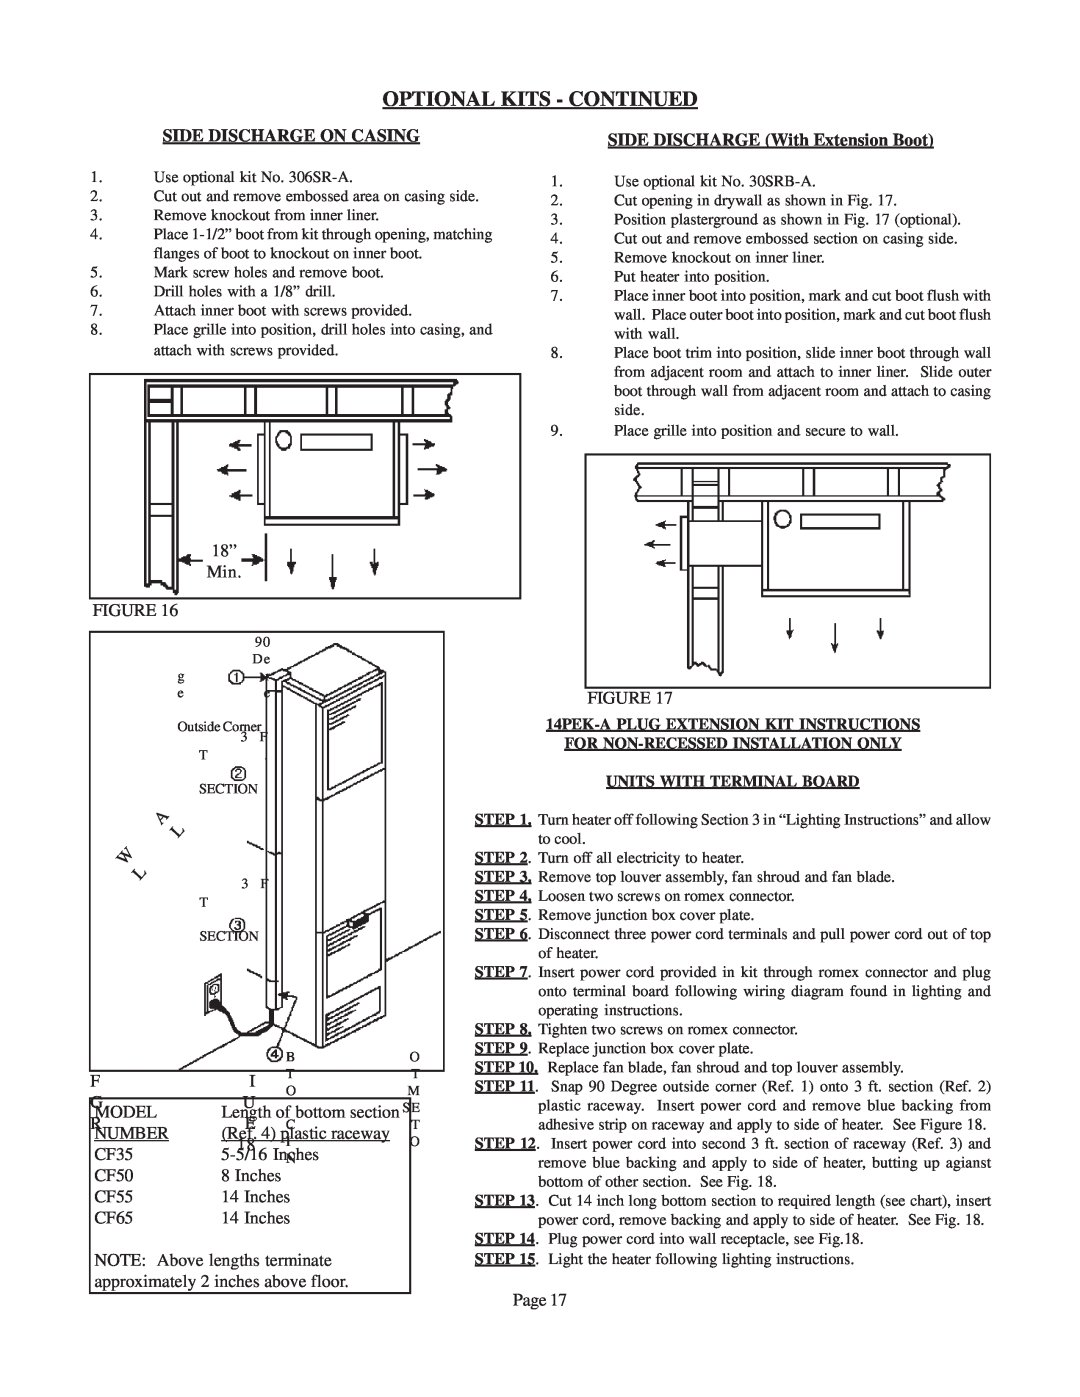 Louisville Tin and Stove 78111 Optional Kits - Continued, Side Discharge On Casing, SIDE DISCHARGE With Extension Boot 